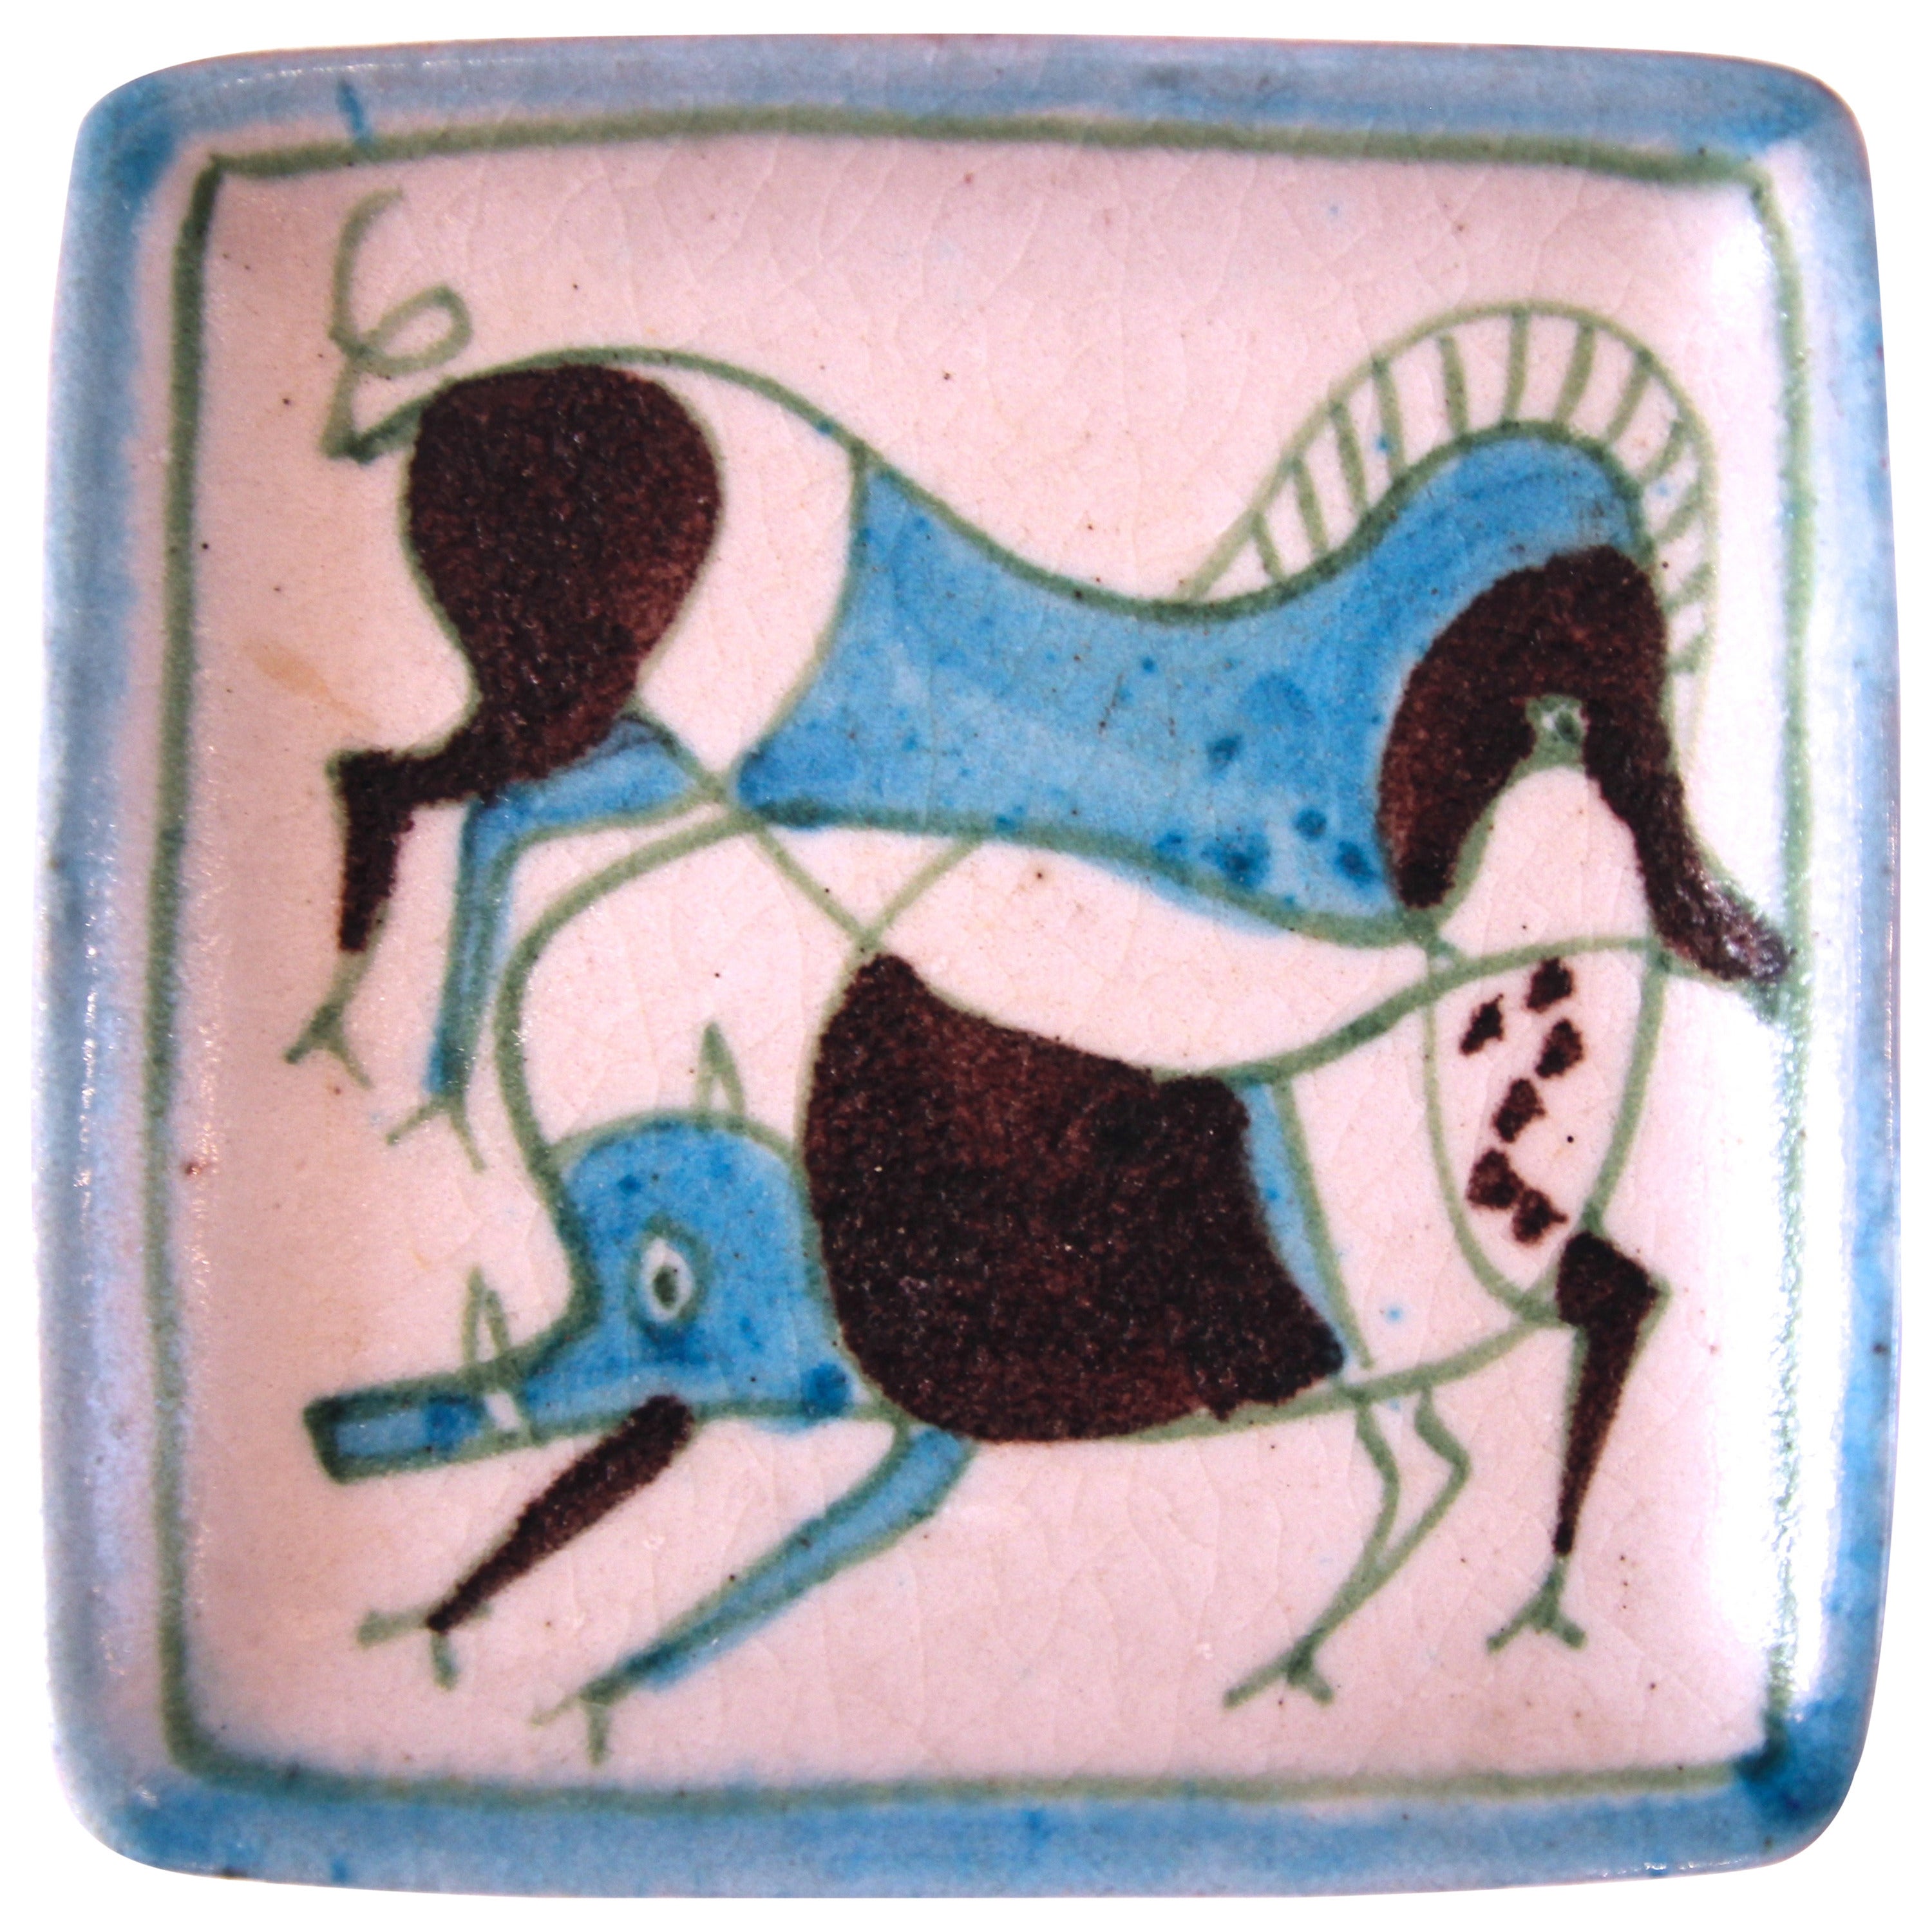 Guido Gambone, Polychrome earthenware plate, signed, Circa 1960, Italy.